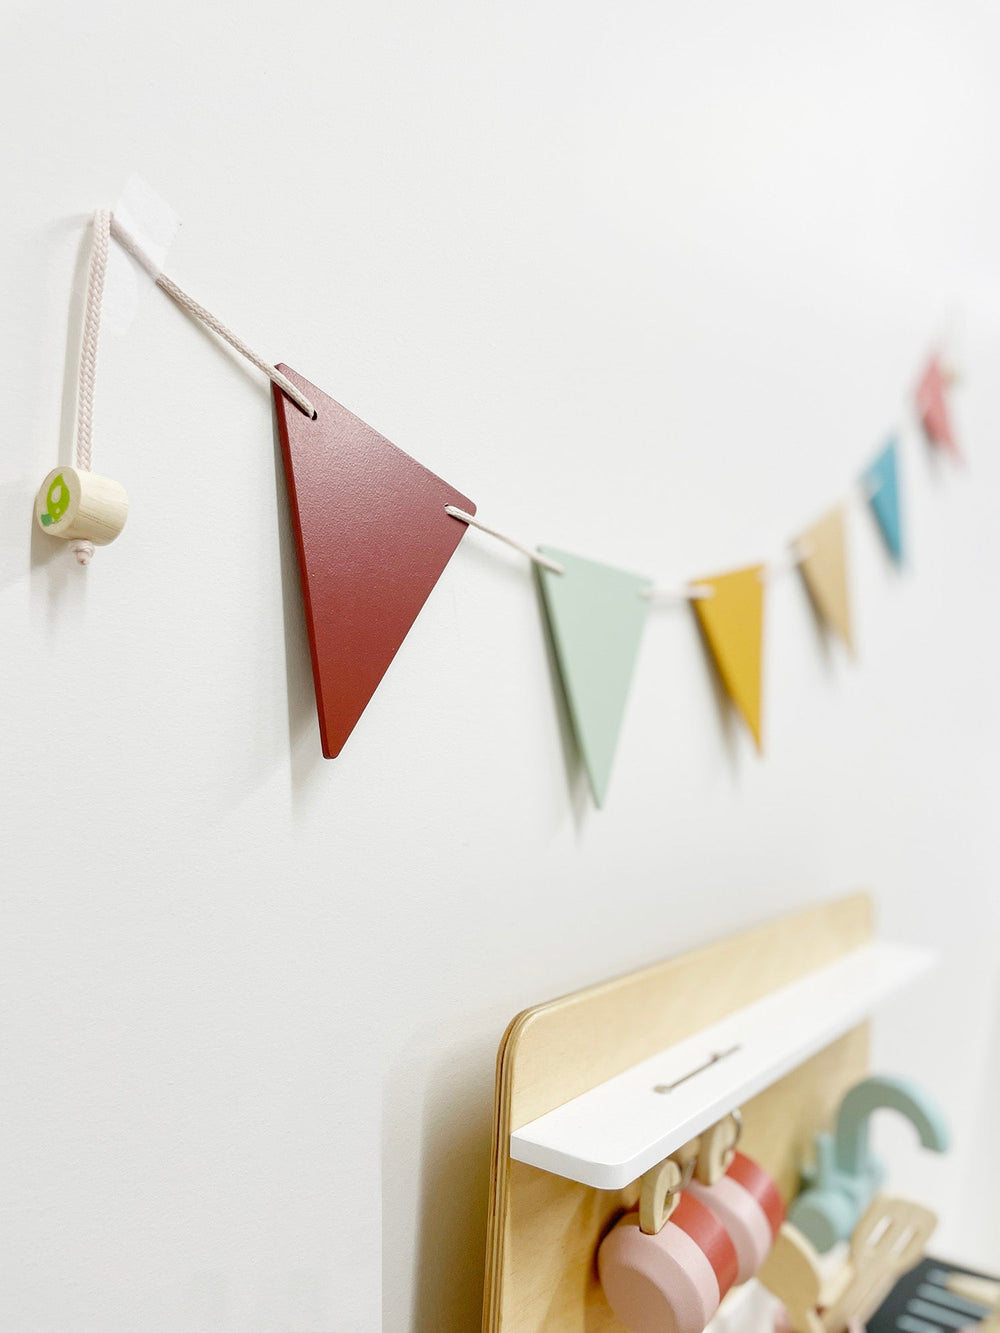 Wooden Bunting